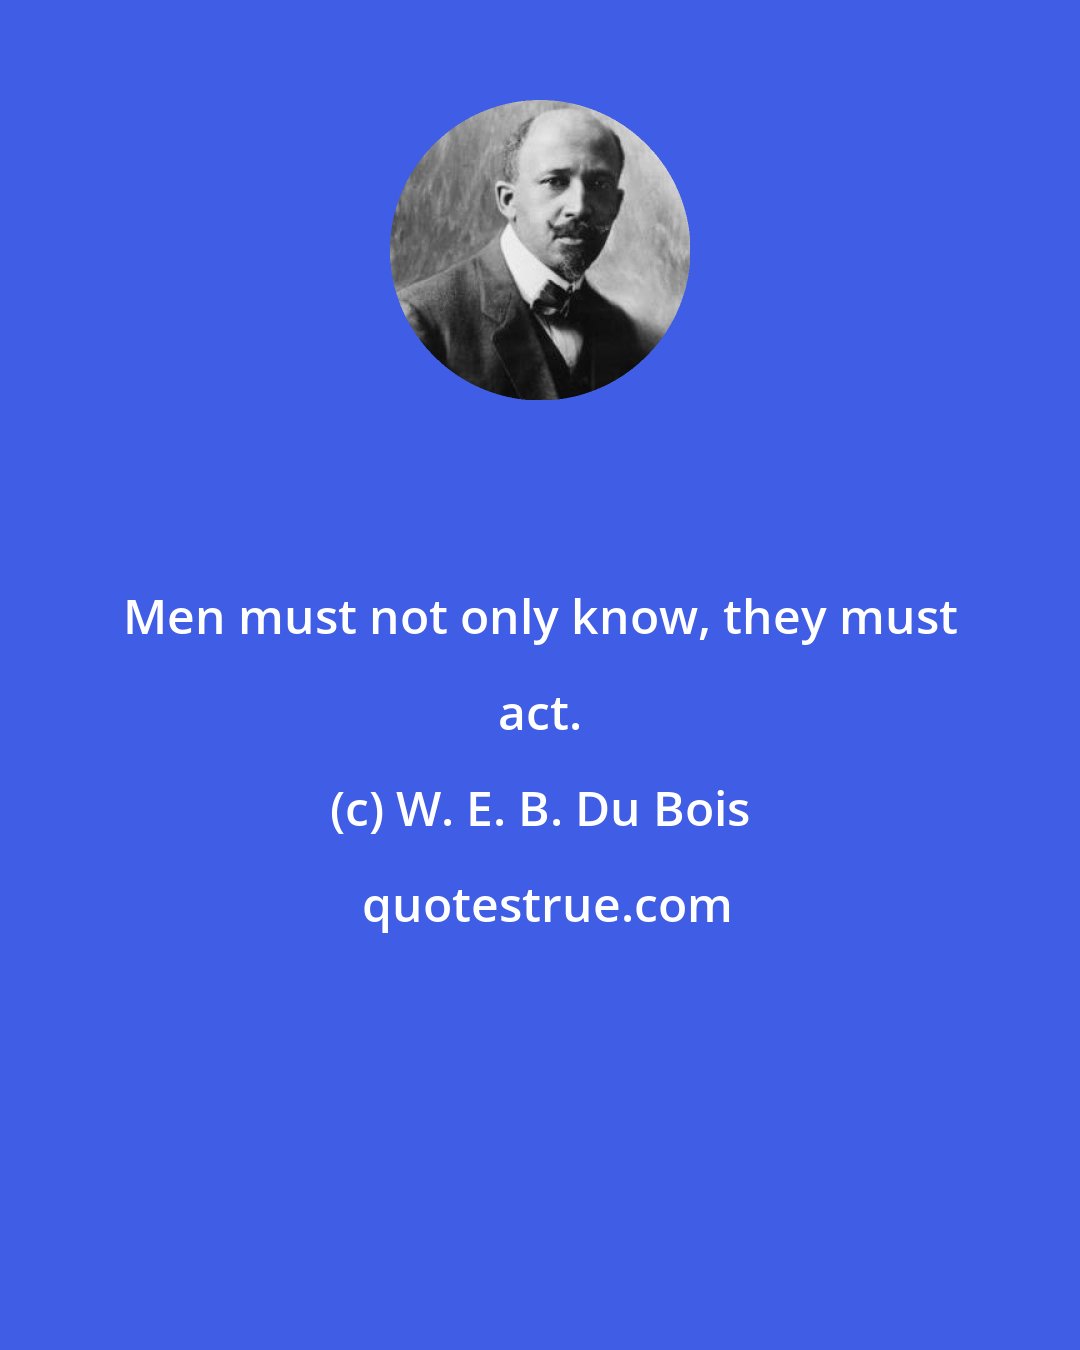 W. E. B. Du Bois: Men must not only know, they must act.